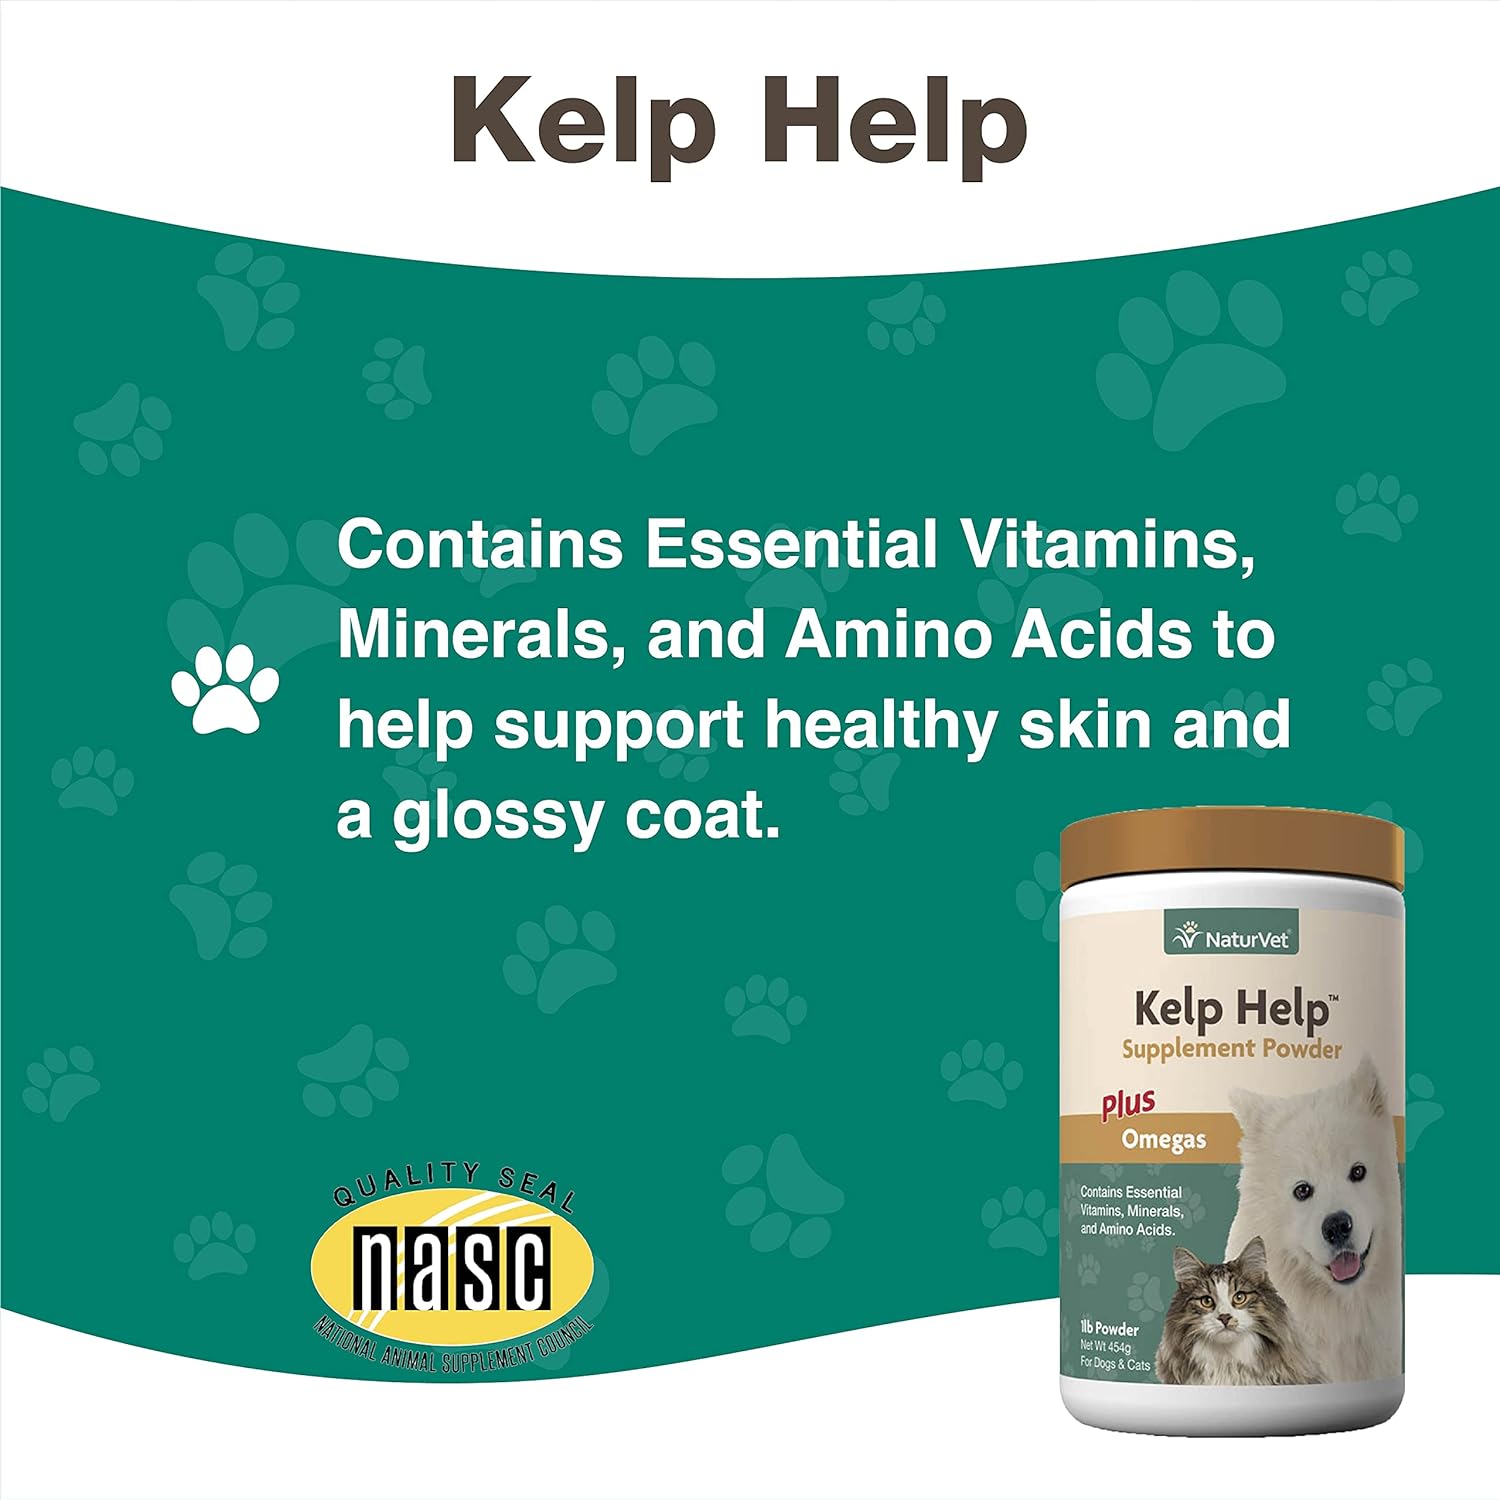 NaturVet Kelp Help Plus Omegas Skin and Coat Supplement for Dogs and Cats, Powder, Made in The USA with Globally Source Ingredients 1 Pound : Pet Herbal Supplements : Pet Supplies